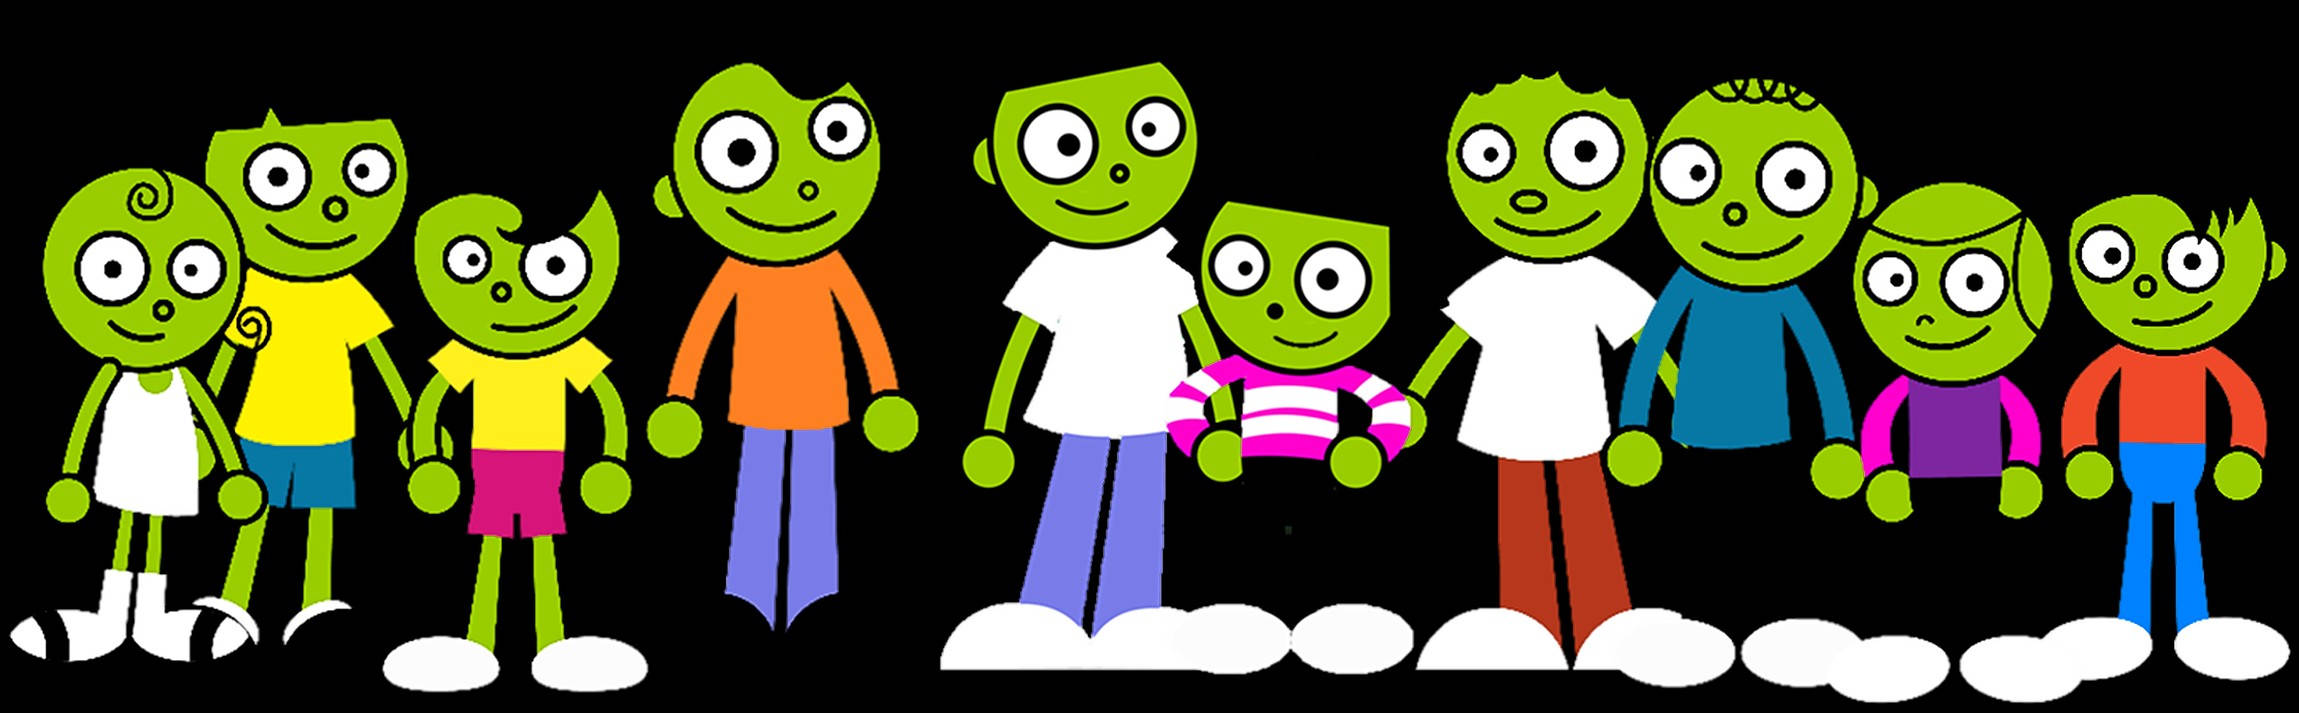 Pbs Kids Family Background